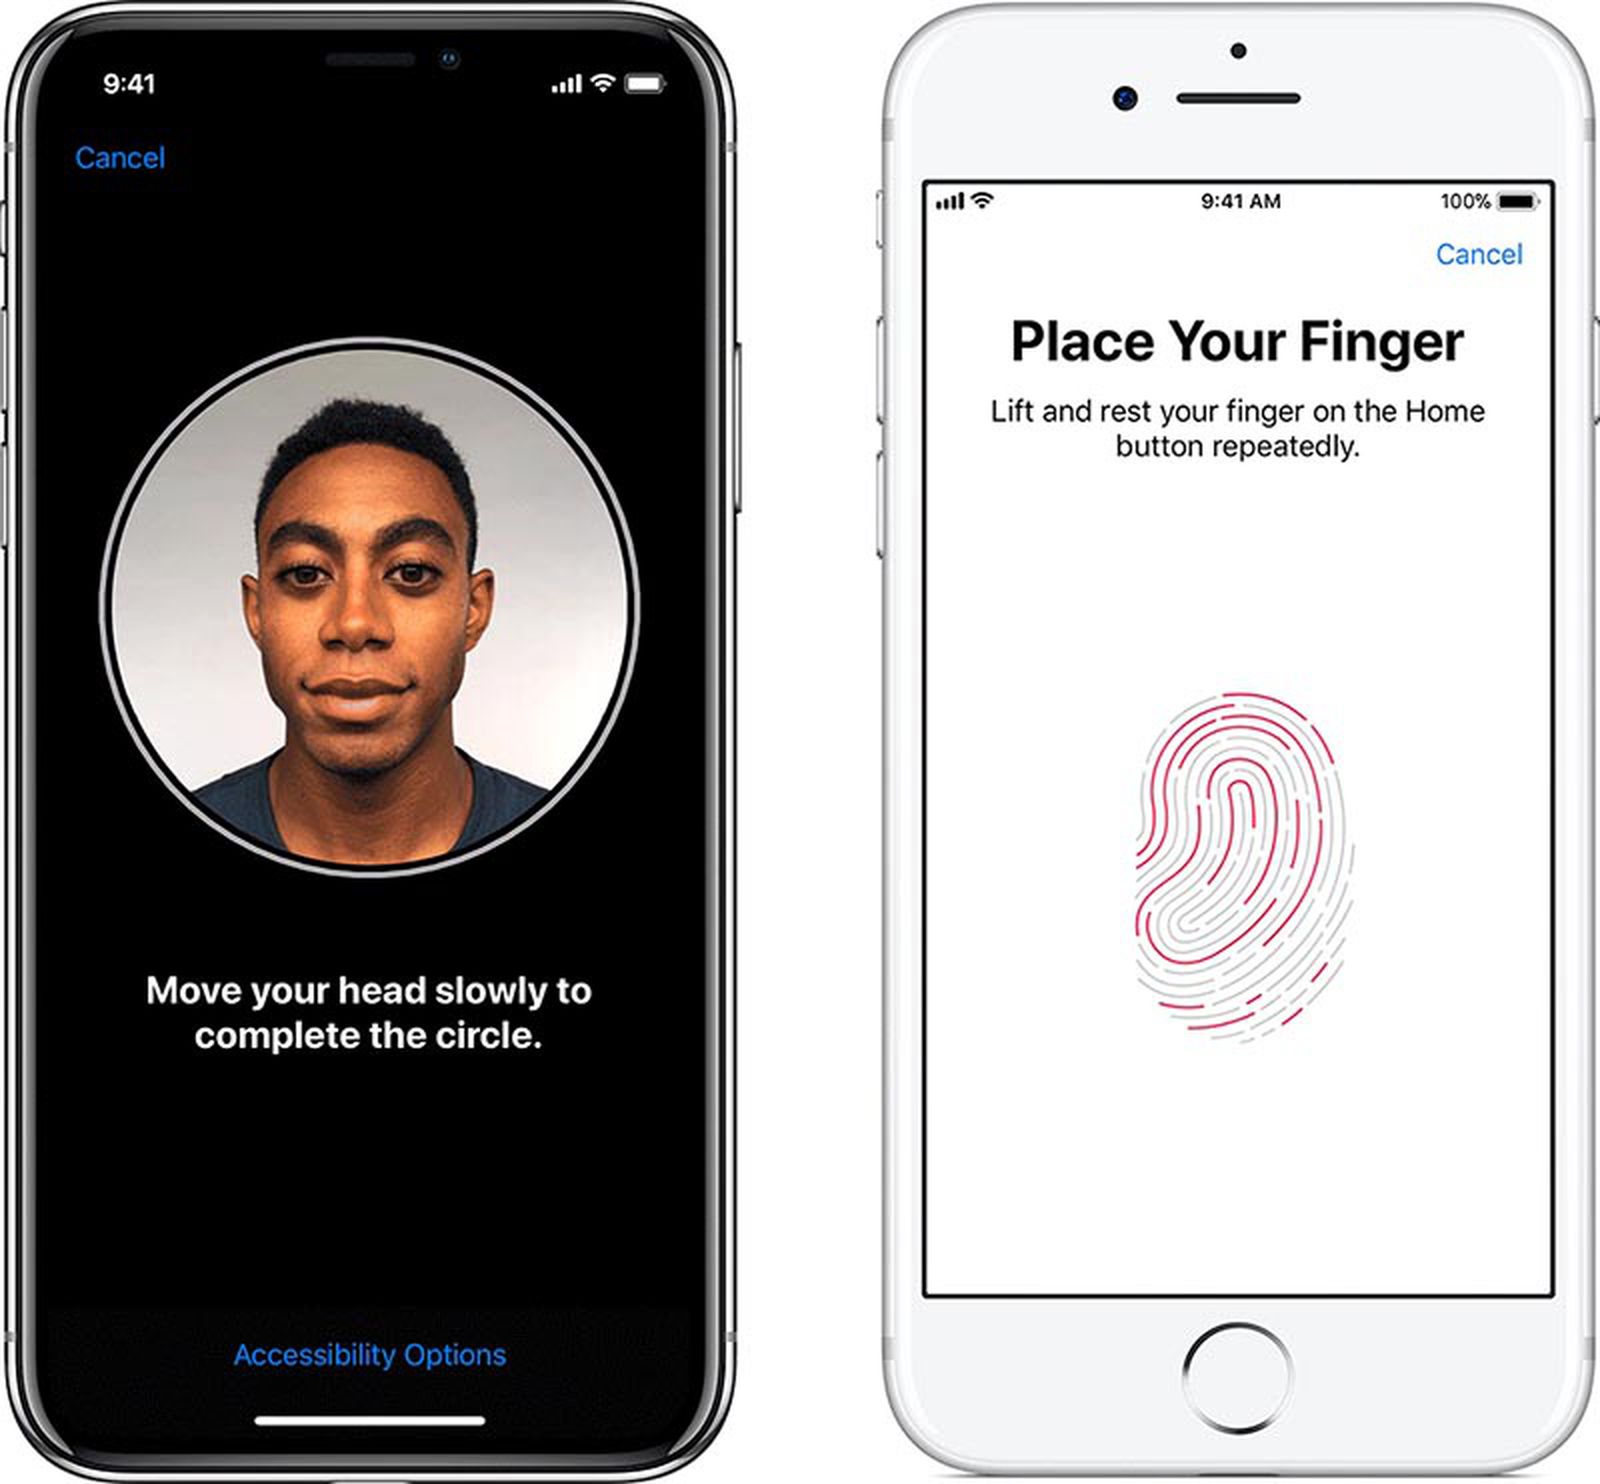 Craig Federighi: Apple Focused on Single-User Face ID, Touch ID Was Never  Intended for Multiple Users - MacRumors